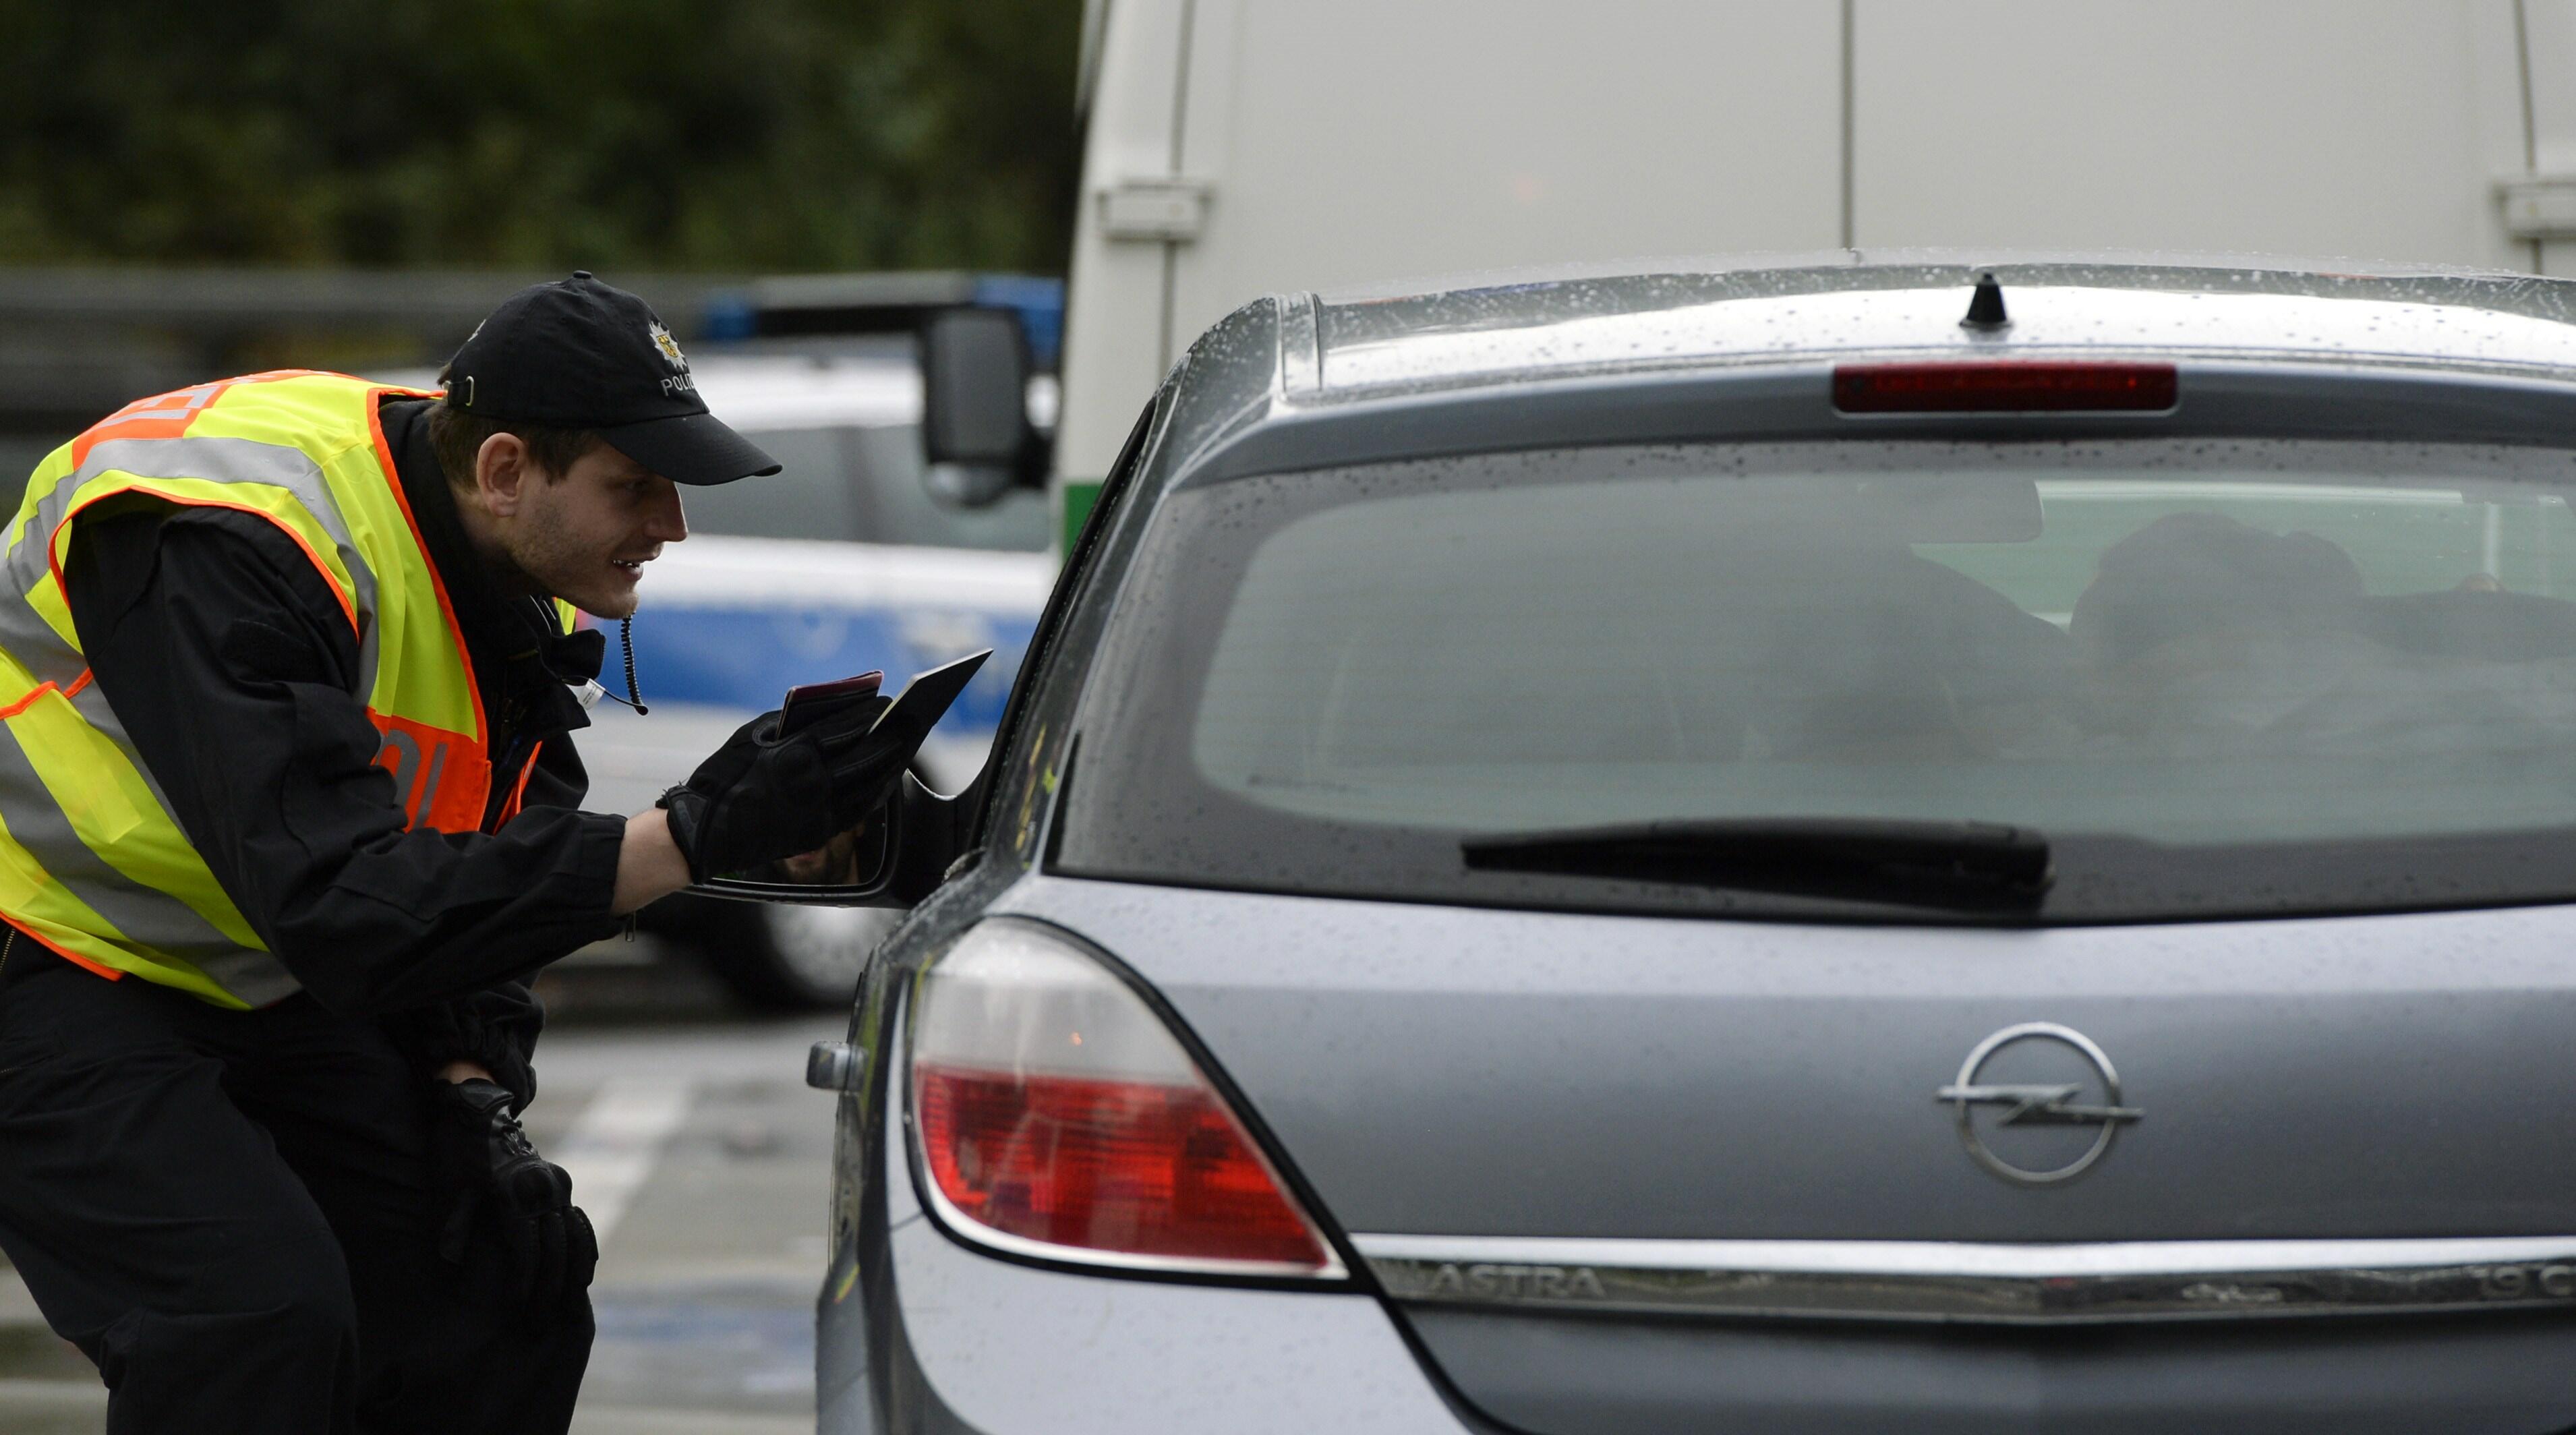 A police officer controls a car at a parking spot at the German-Austria border, near the village of Passau, southern Germany, on September 14, 2015. Honking cars with stressed drivers banked up for kilometres (miles) at an Austrian-German road crossing Mo